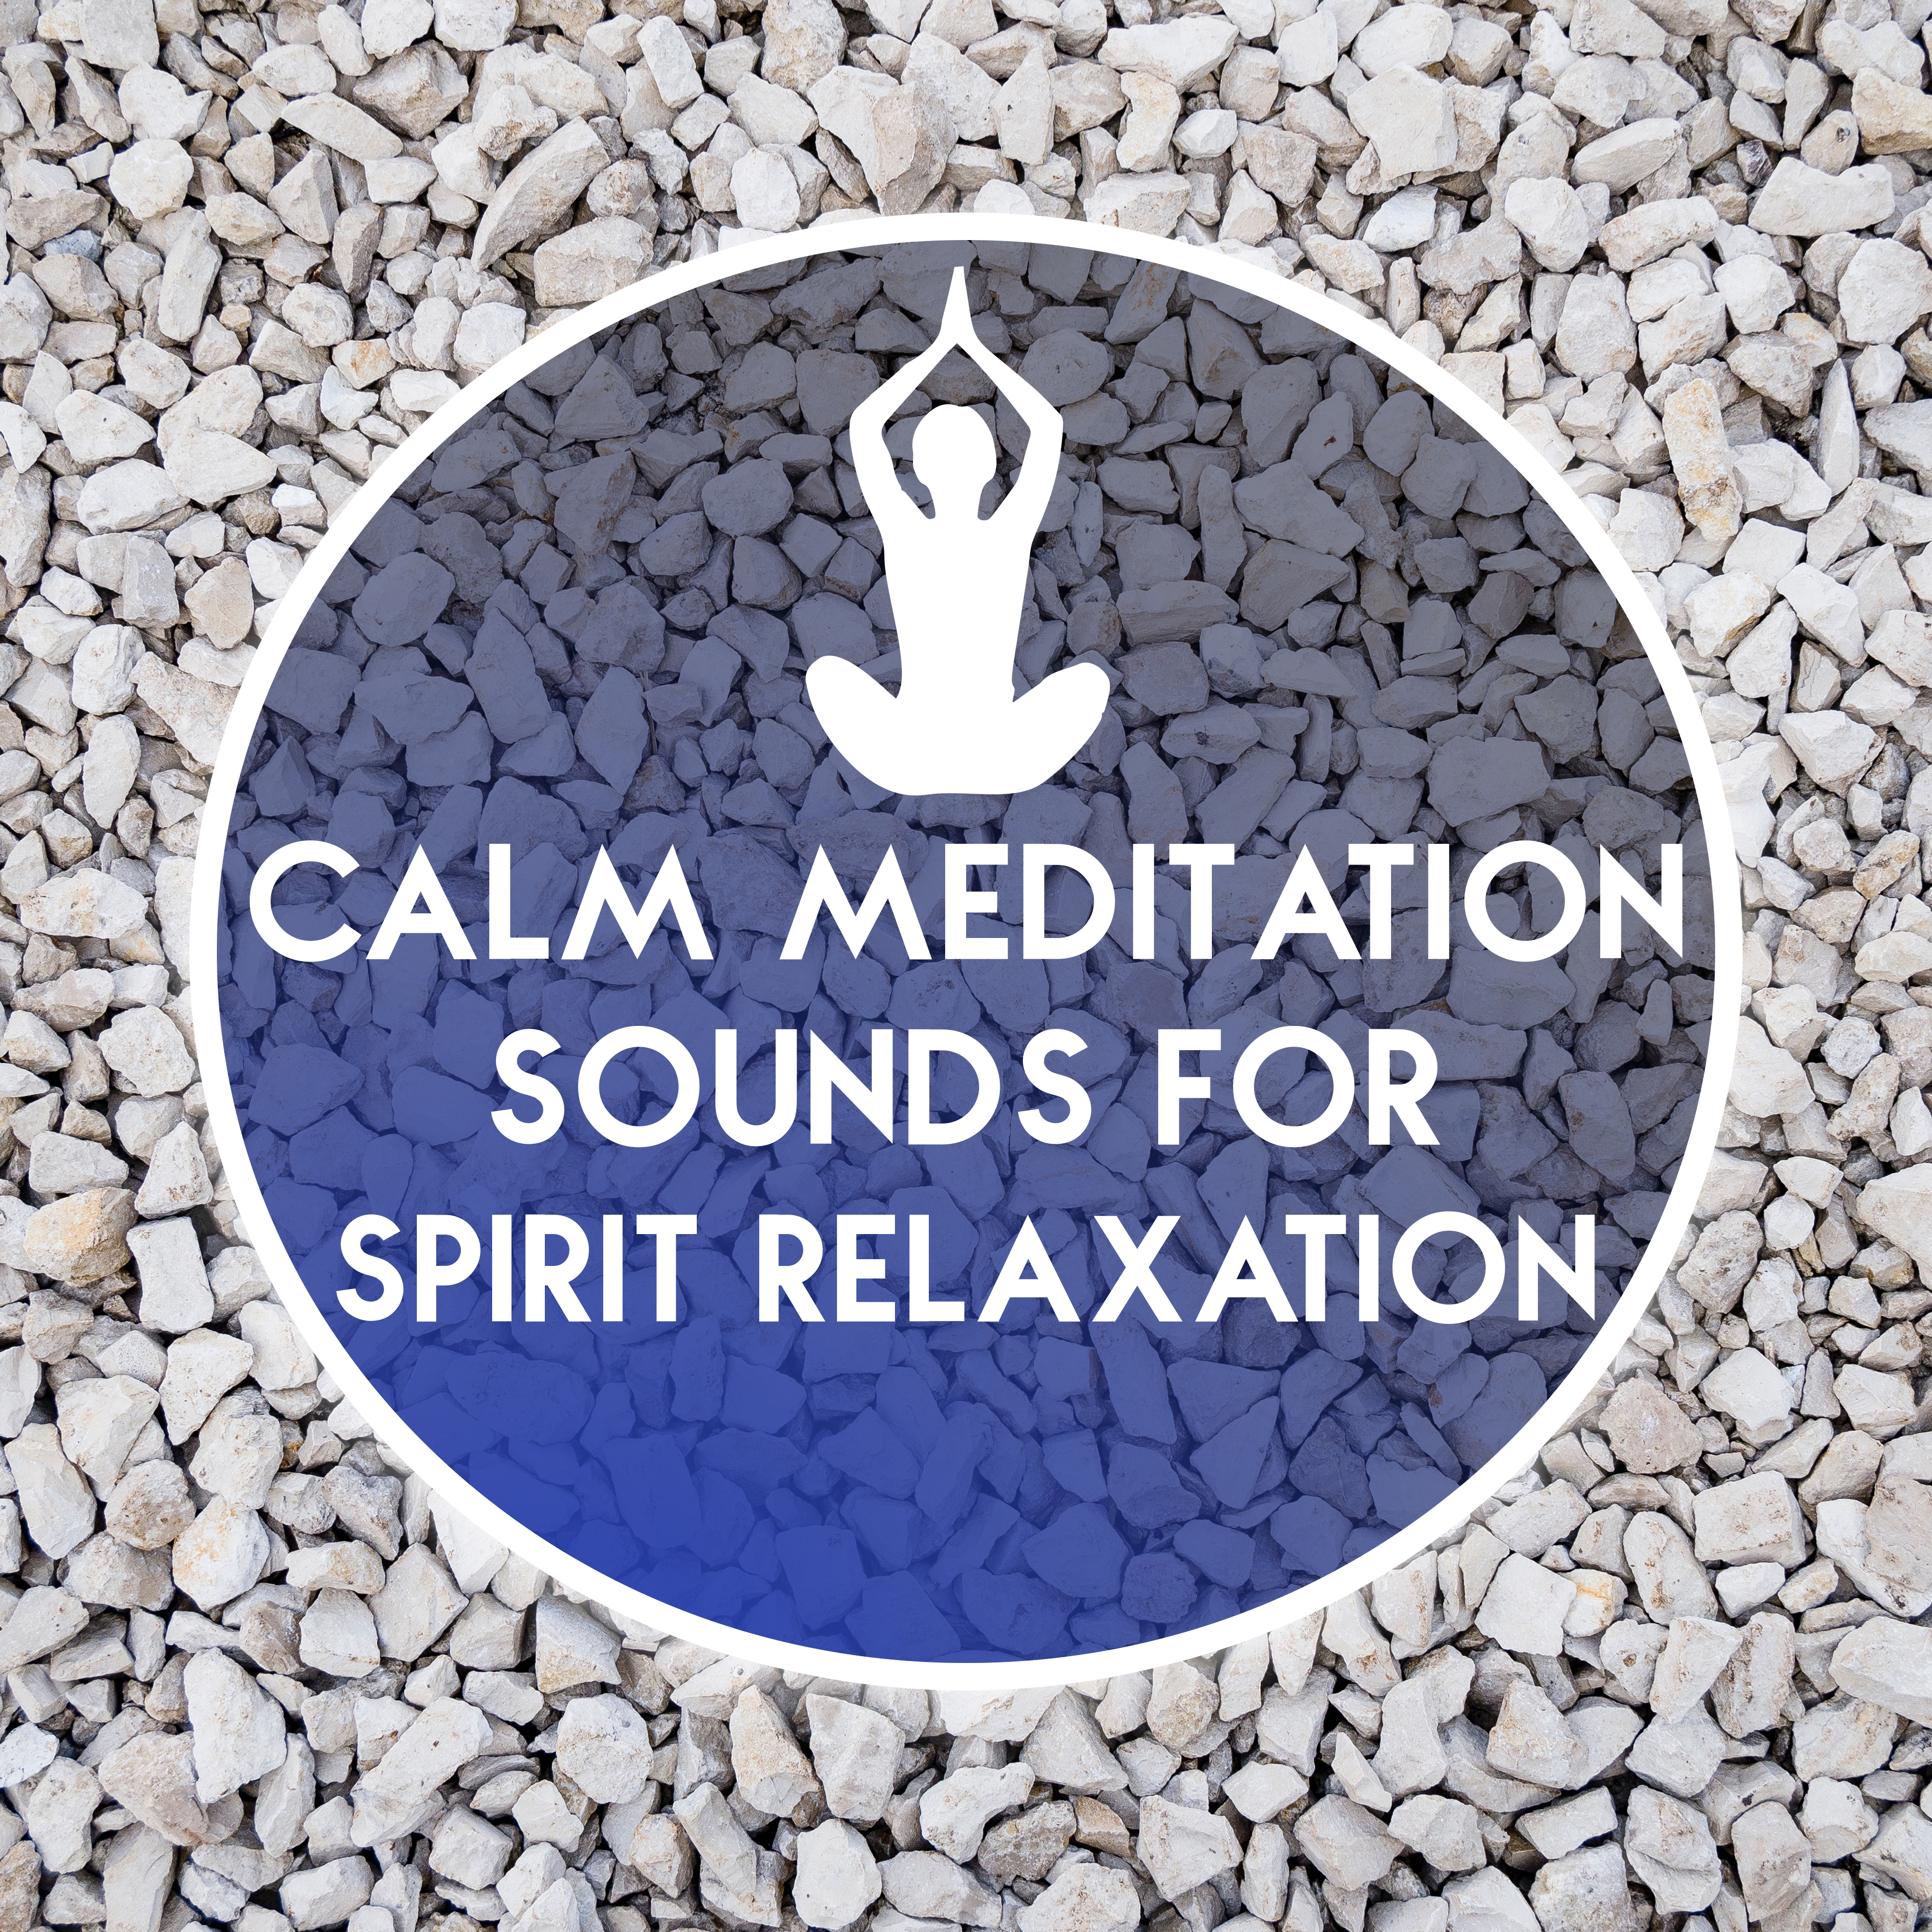 Calm Meditation Sounds for Spirit Relaxation – Easy Listening, Stress Relief, Peaceful Music, Calm Melodies to Meditate